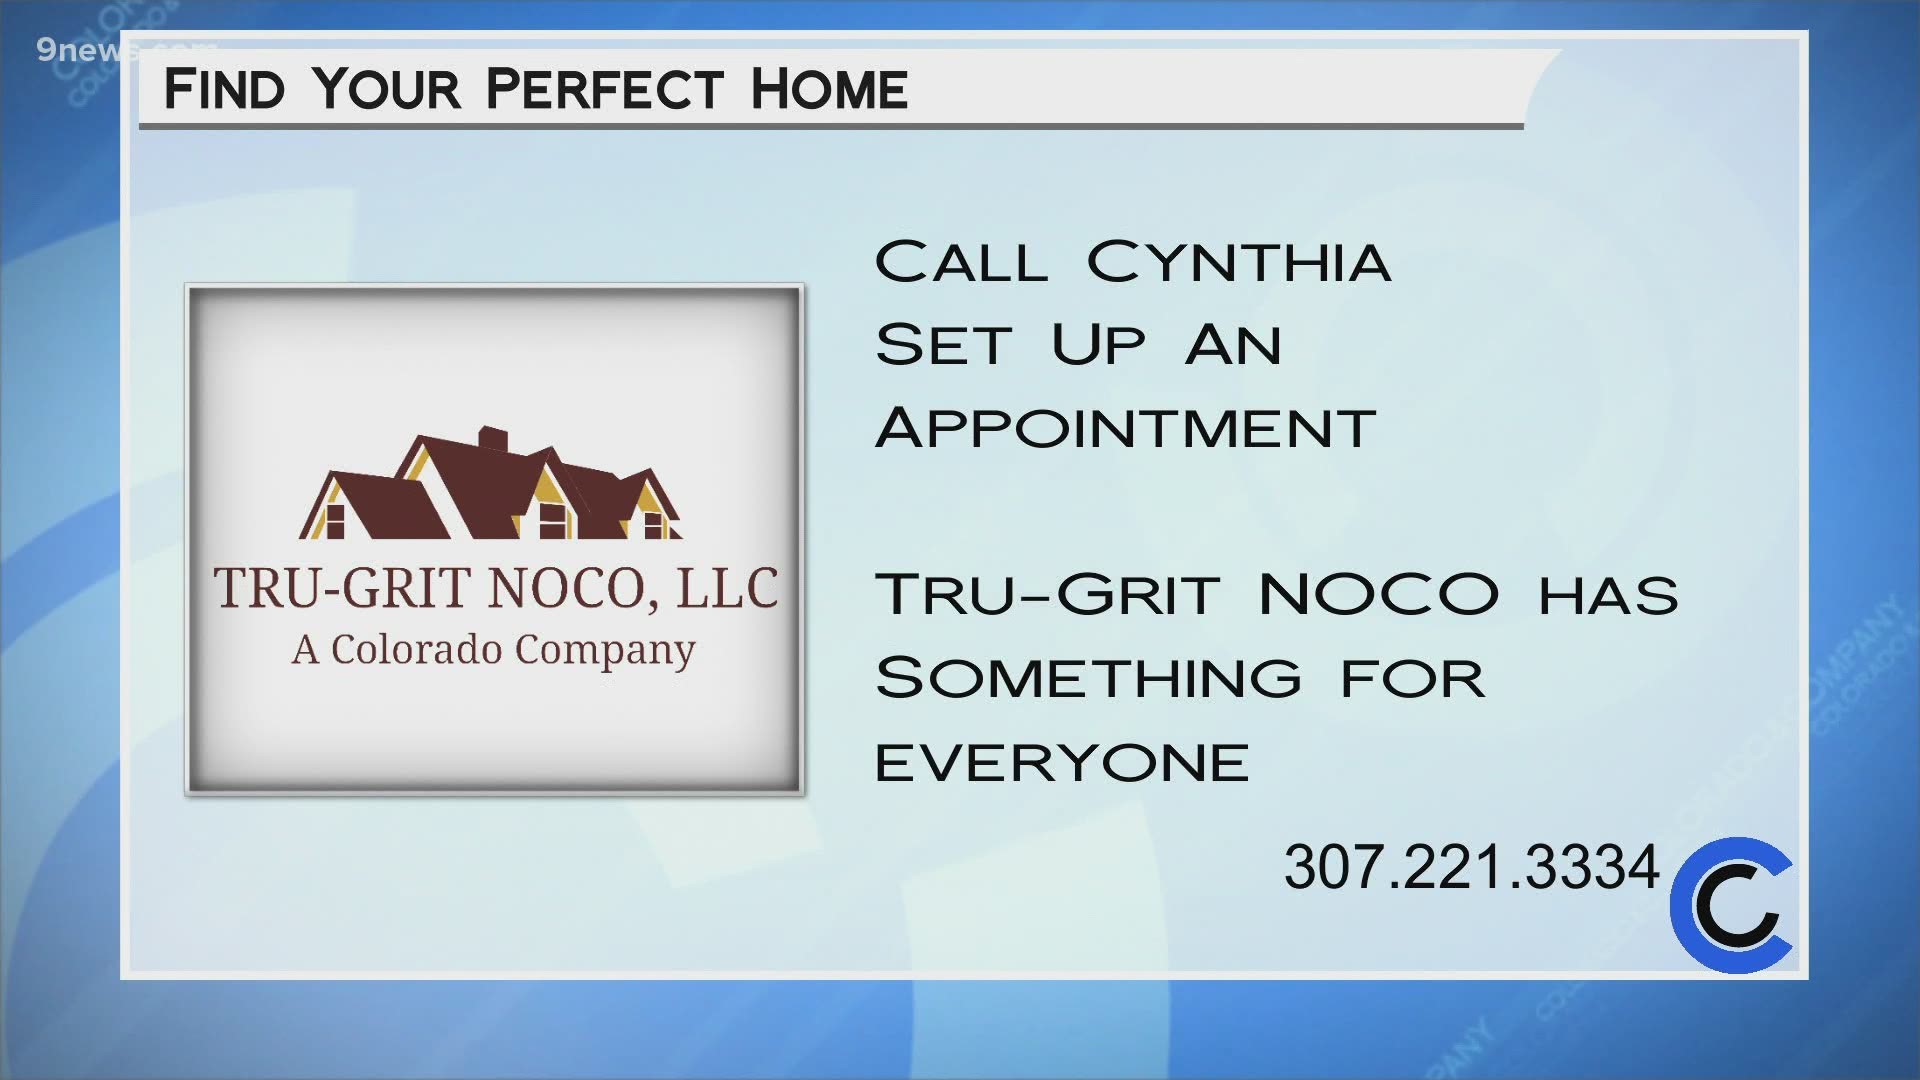 Call Tru Grit at 307.221.3334 or visit MHBWY.com to find out more about the top of the line homes being built in Northern Colorado.